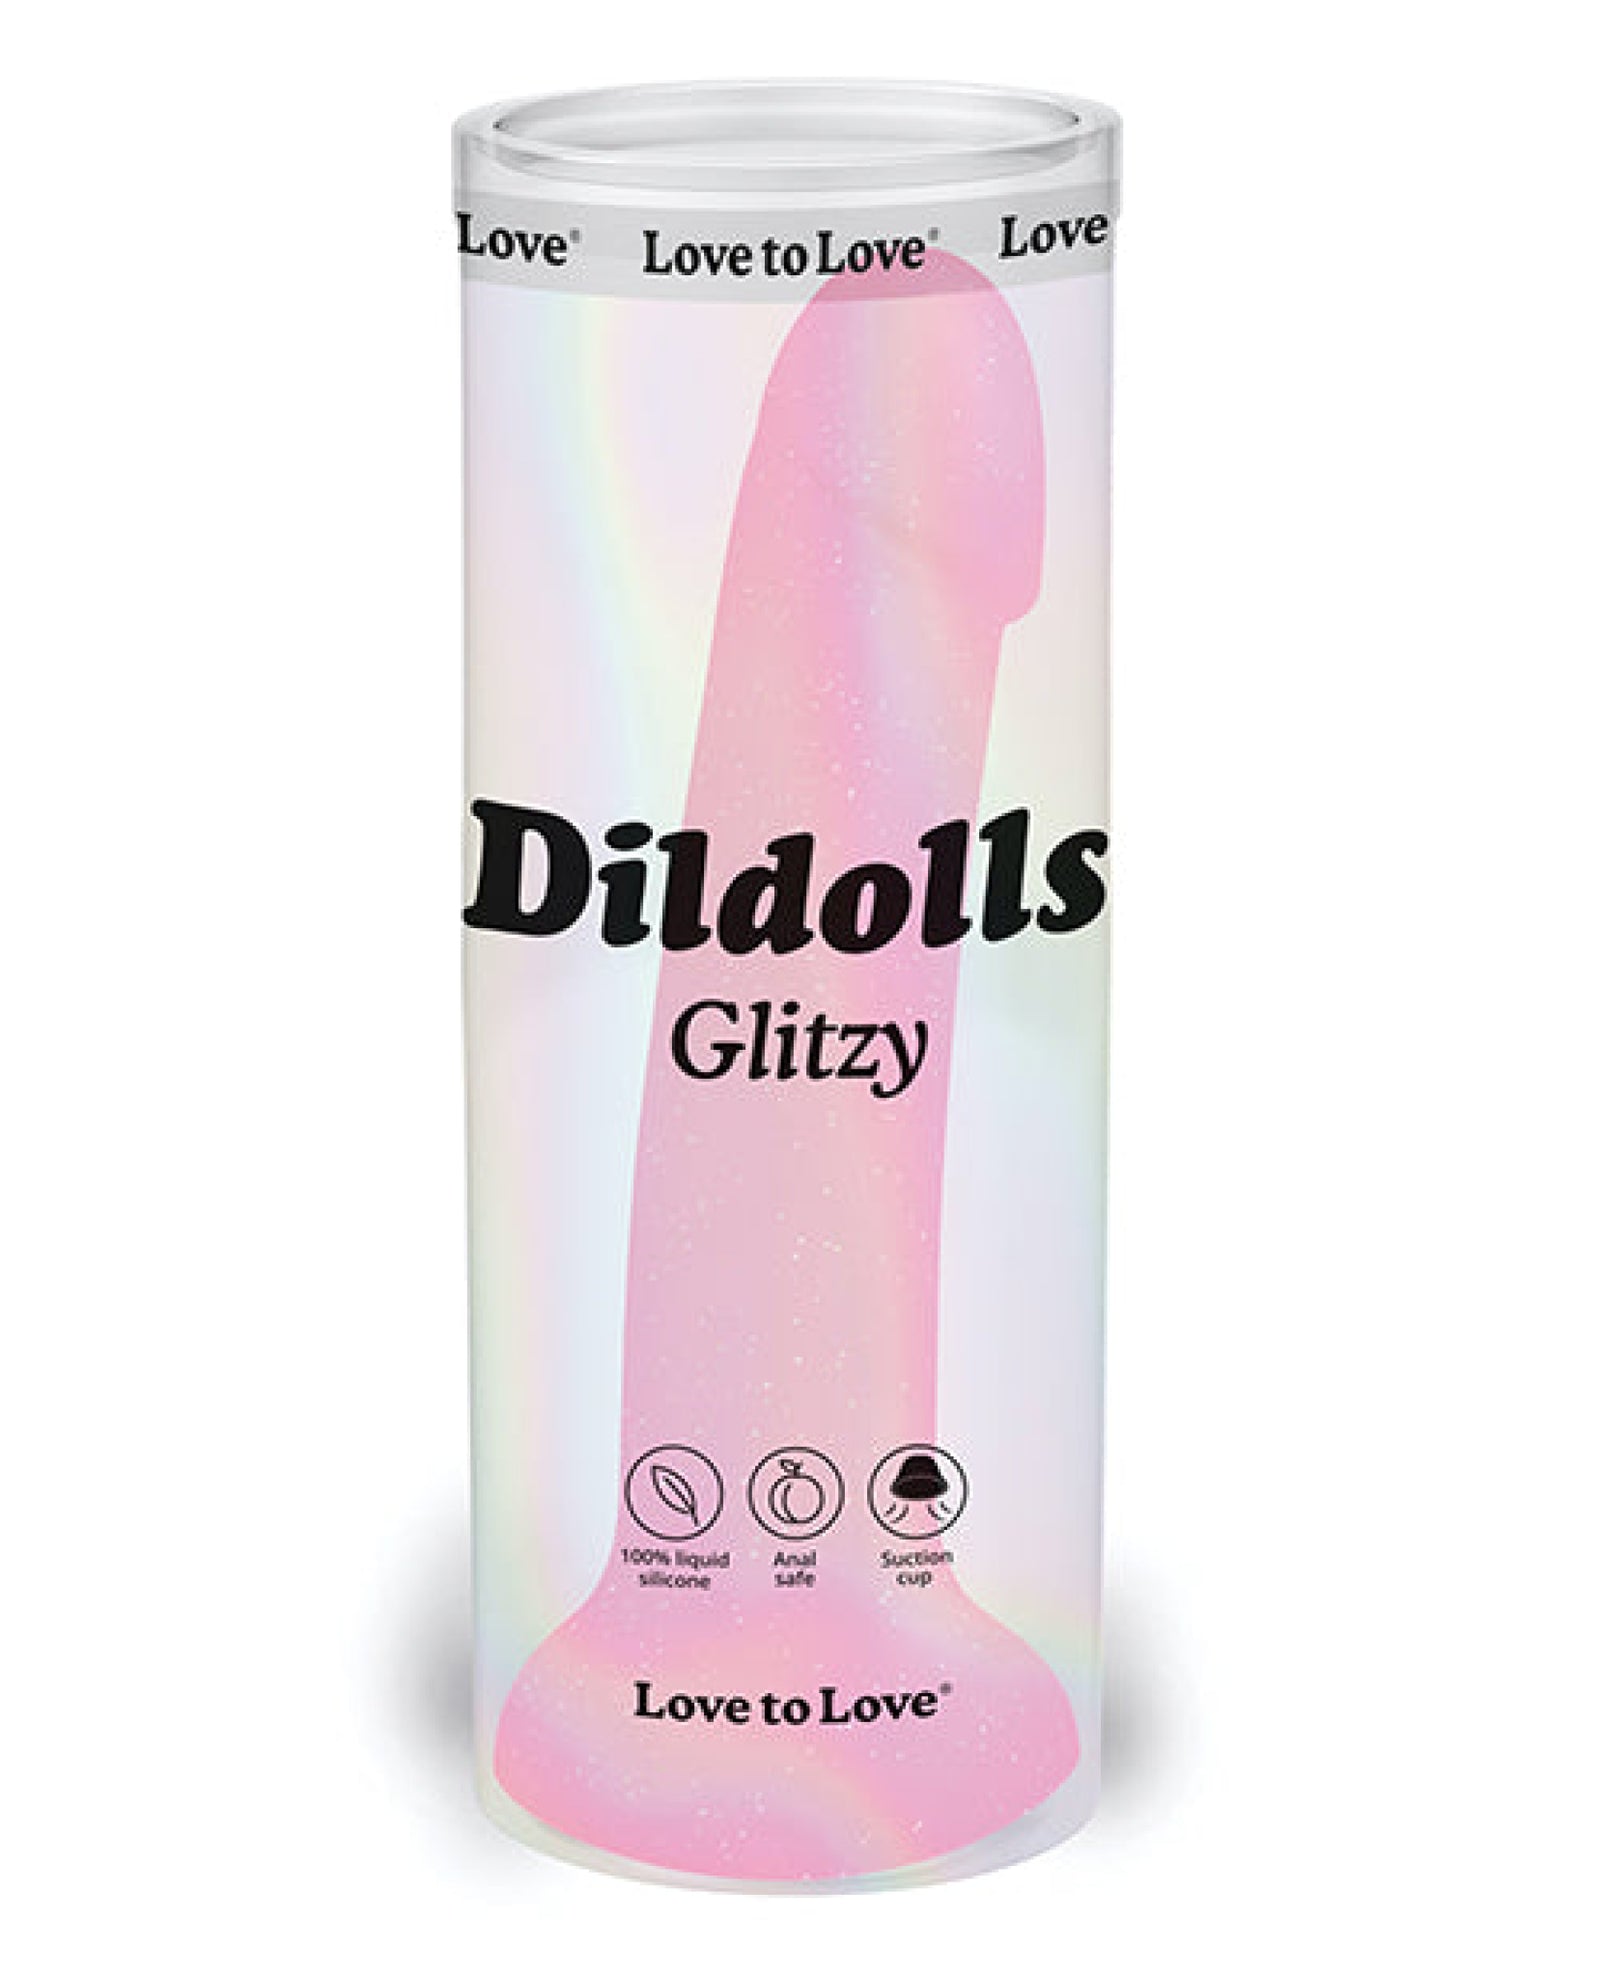 Love To Love Curved Suction Cup Dildolls Glitzy - Glitter Pink Love To Love